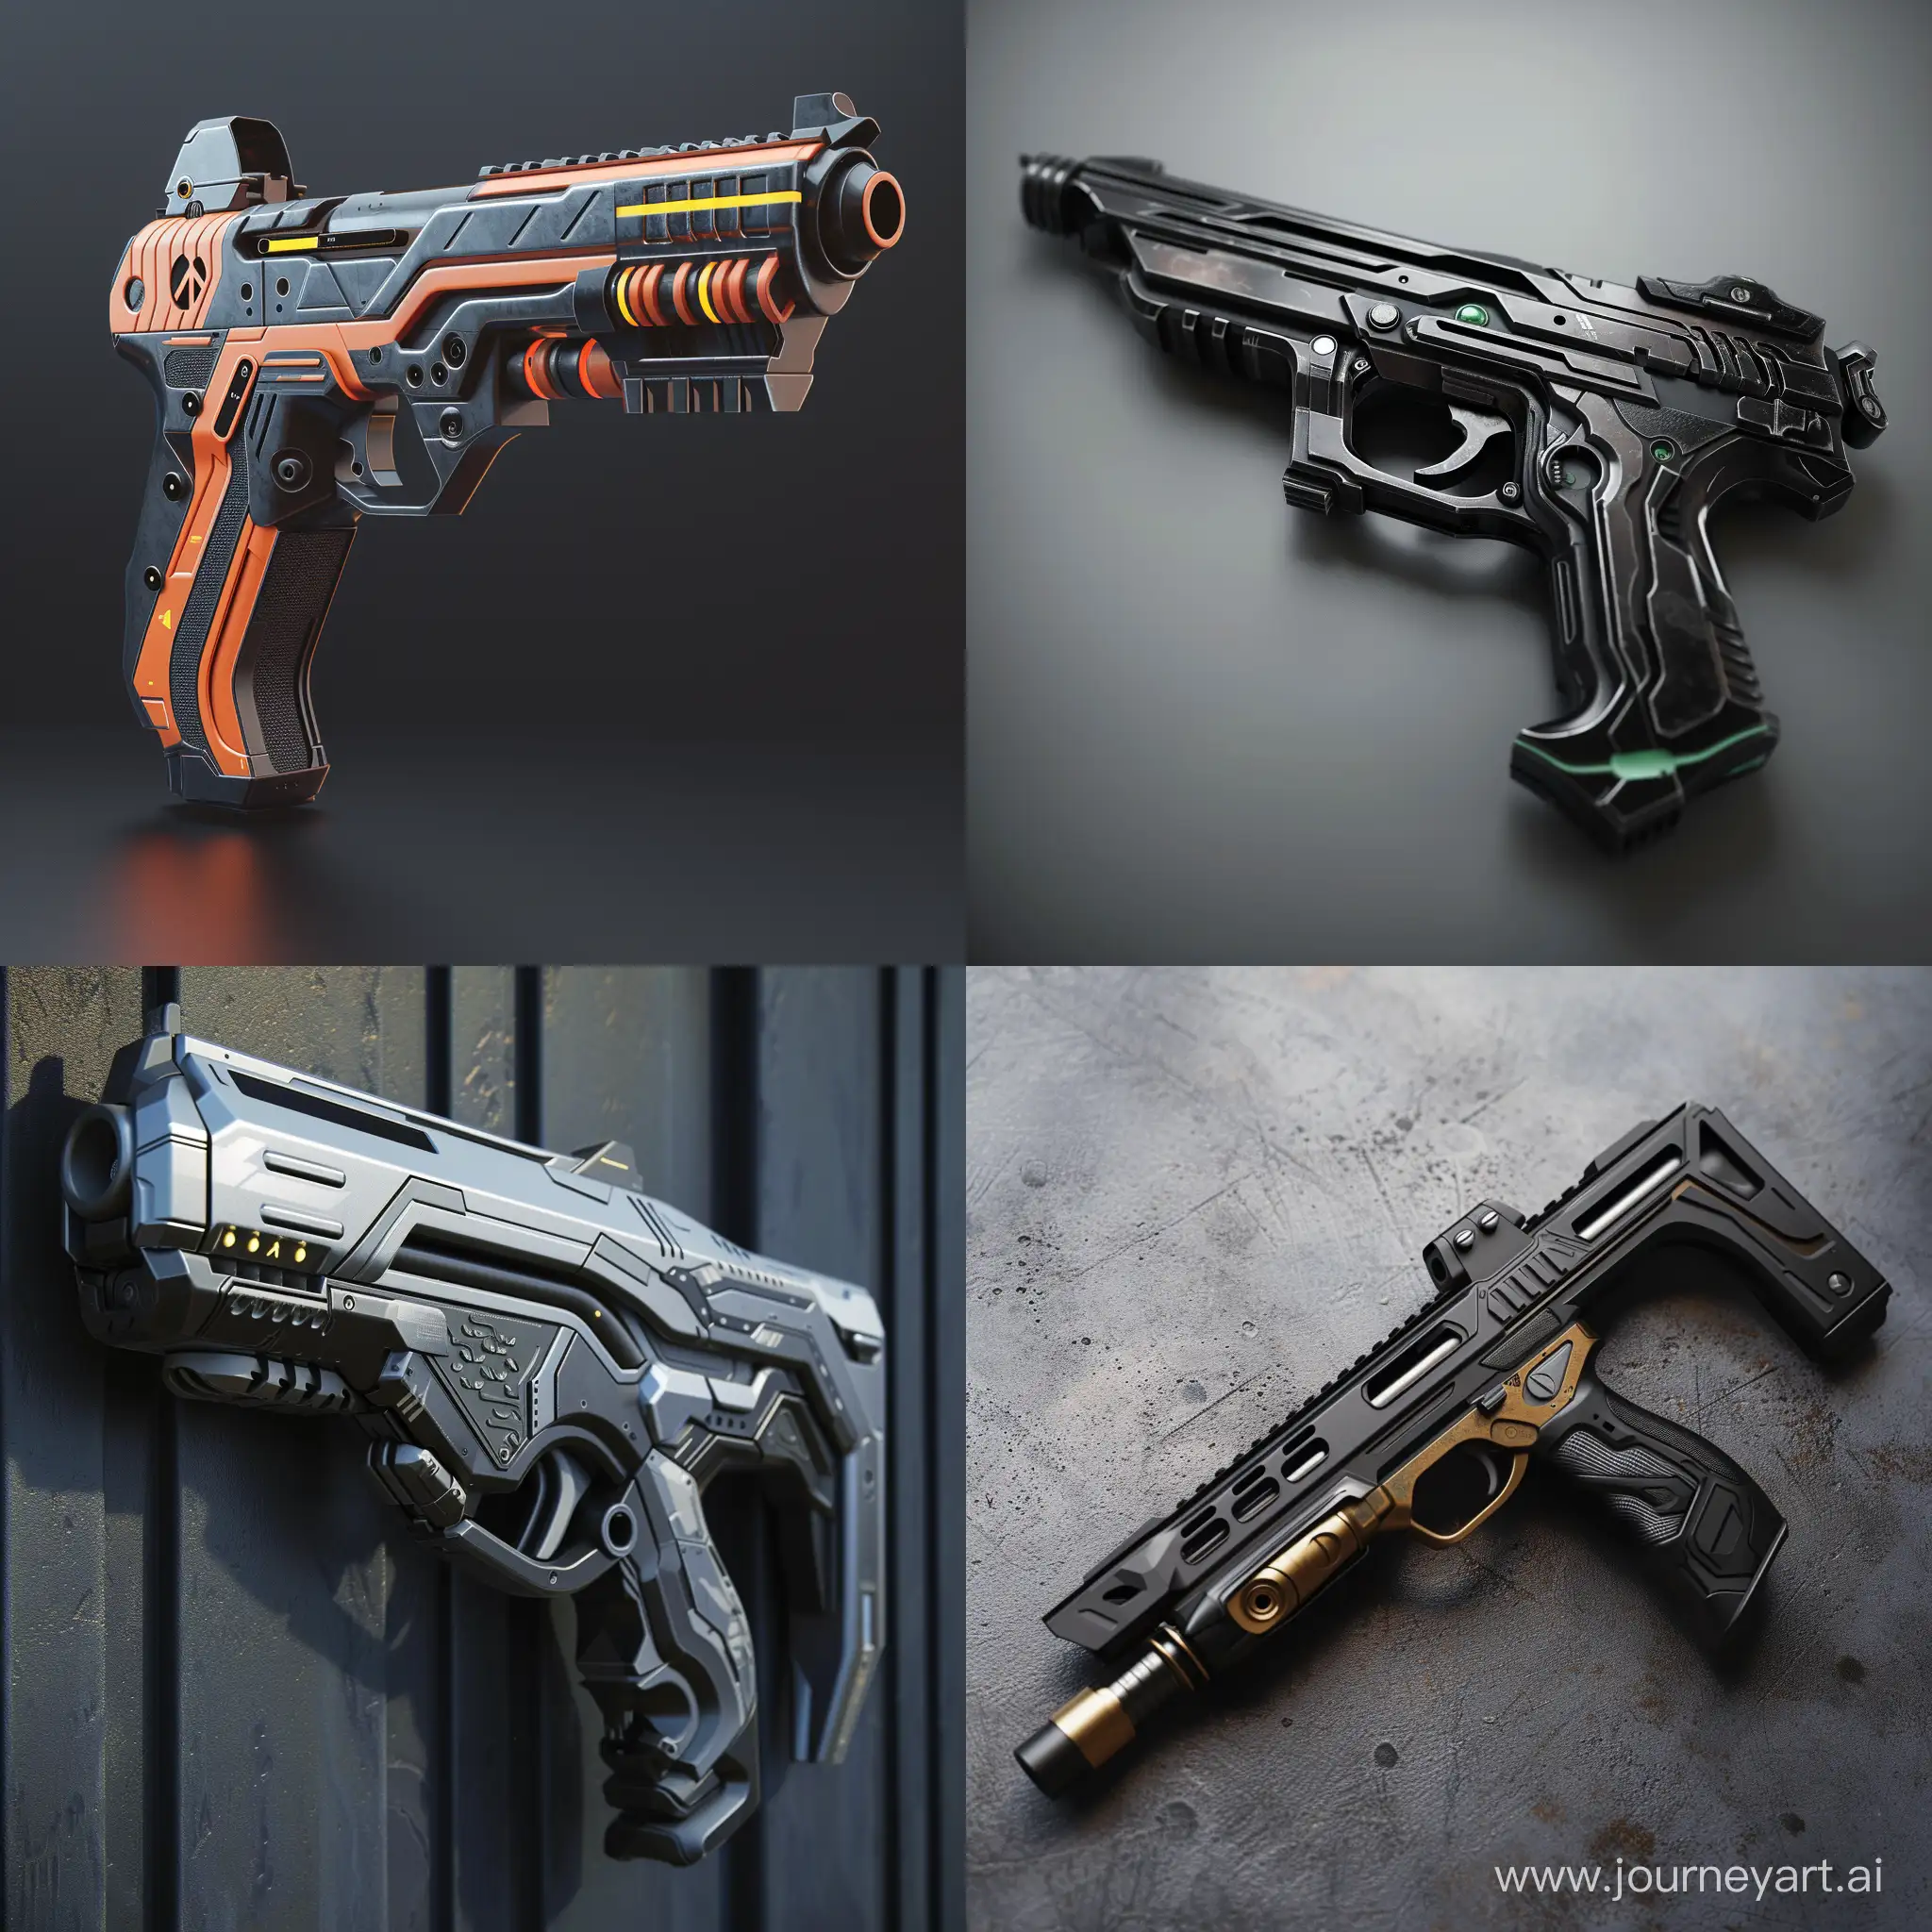 Futuristic-Pistol-with-Integrated-Accessories-in-Cinematic-Realism